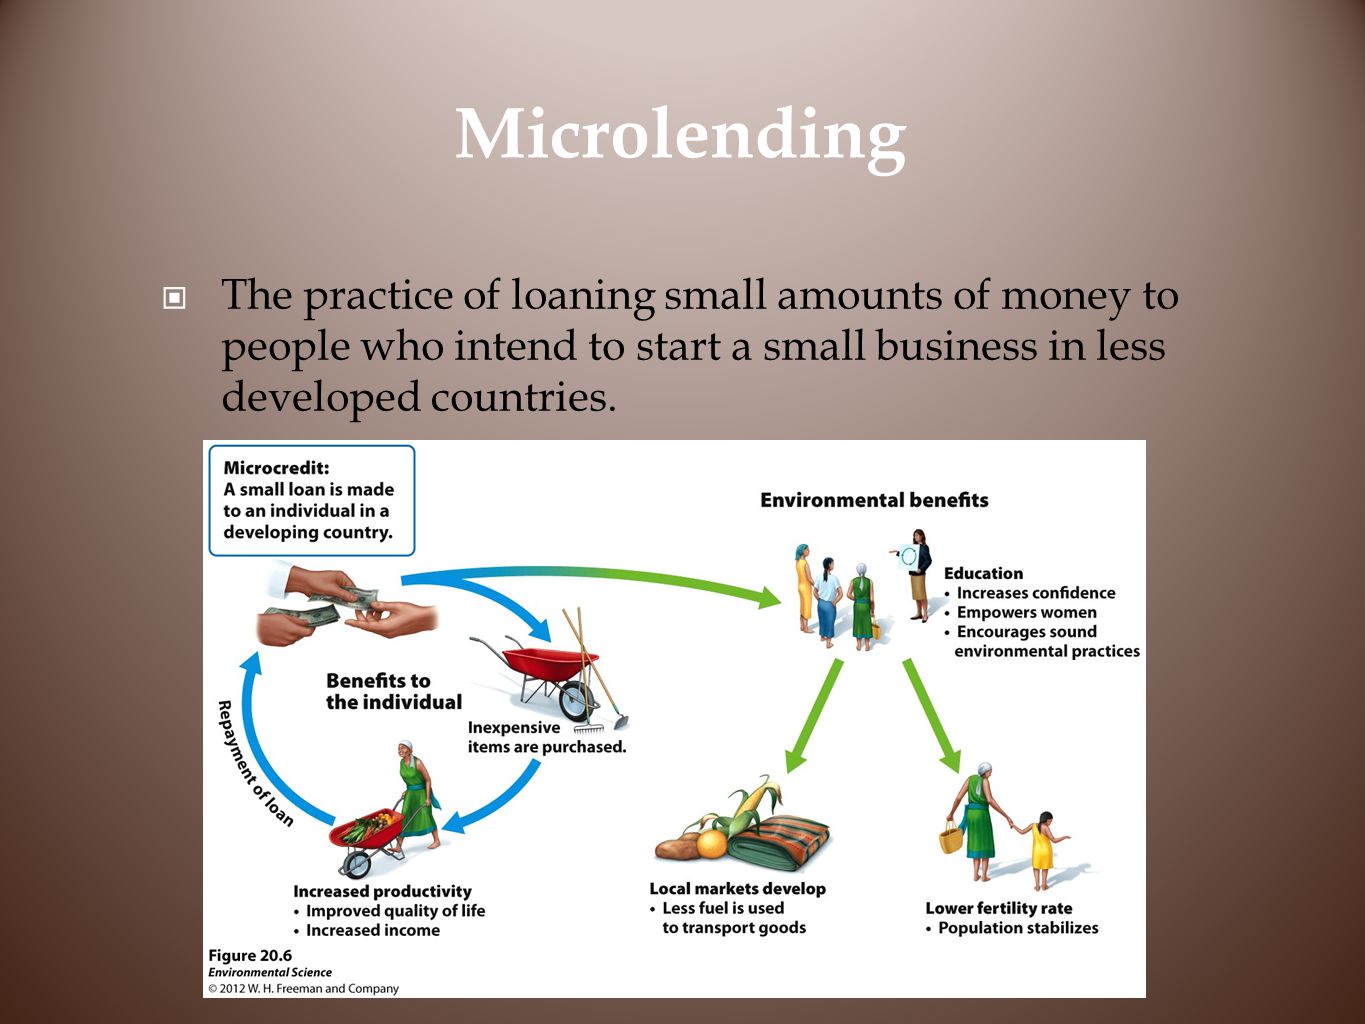 Microlending The practice of loaning small amounts of money to people who intend to start a small business in less developed countries.